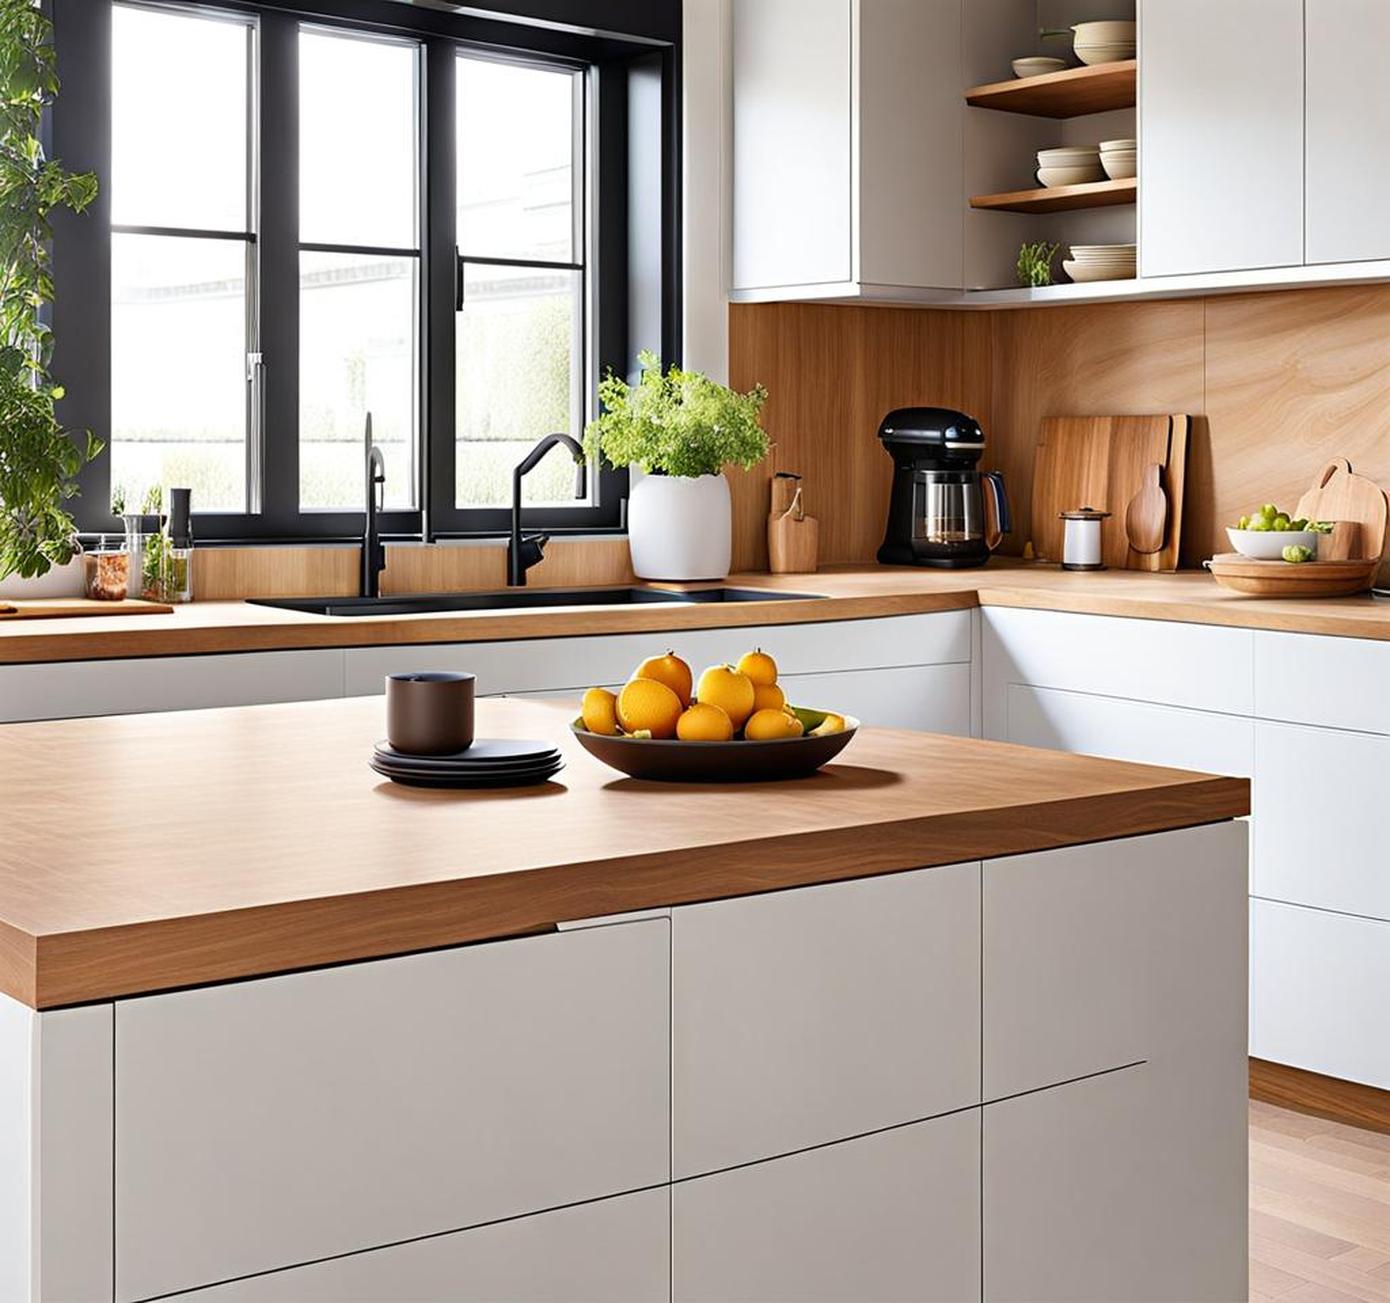 how to cover kitchen countertops